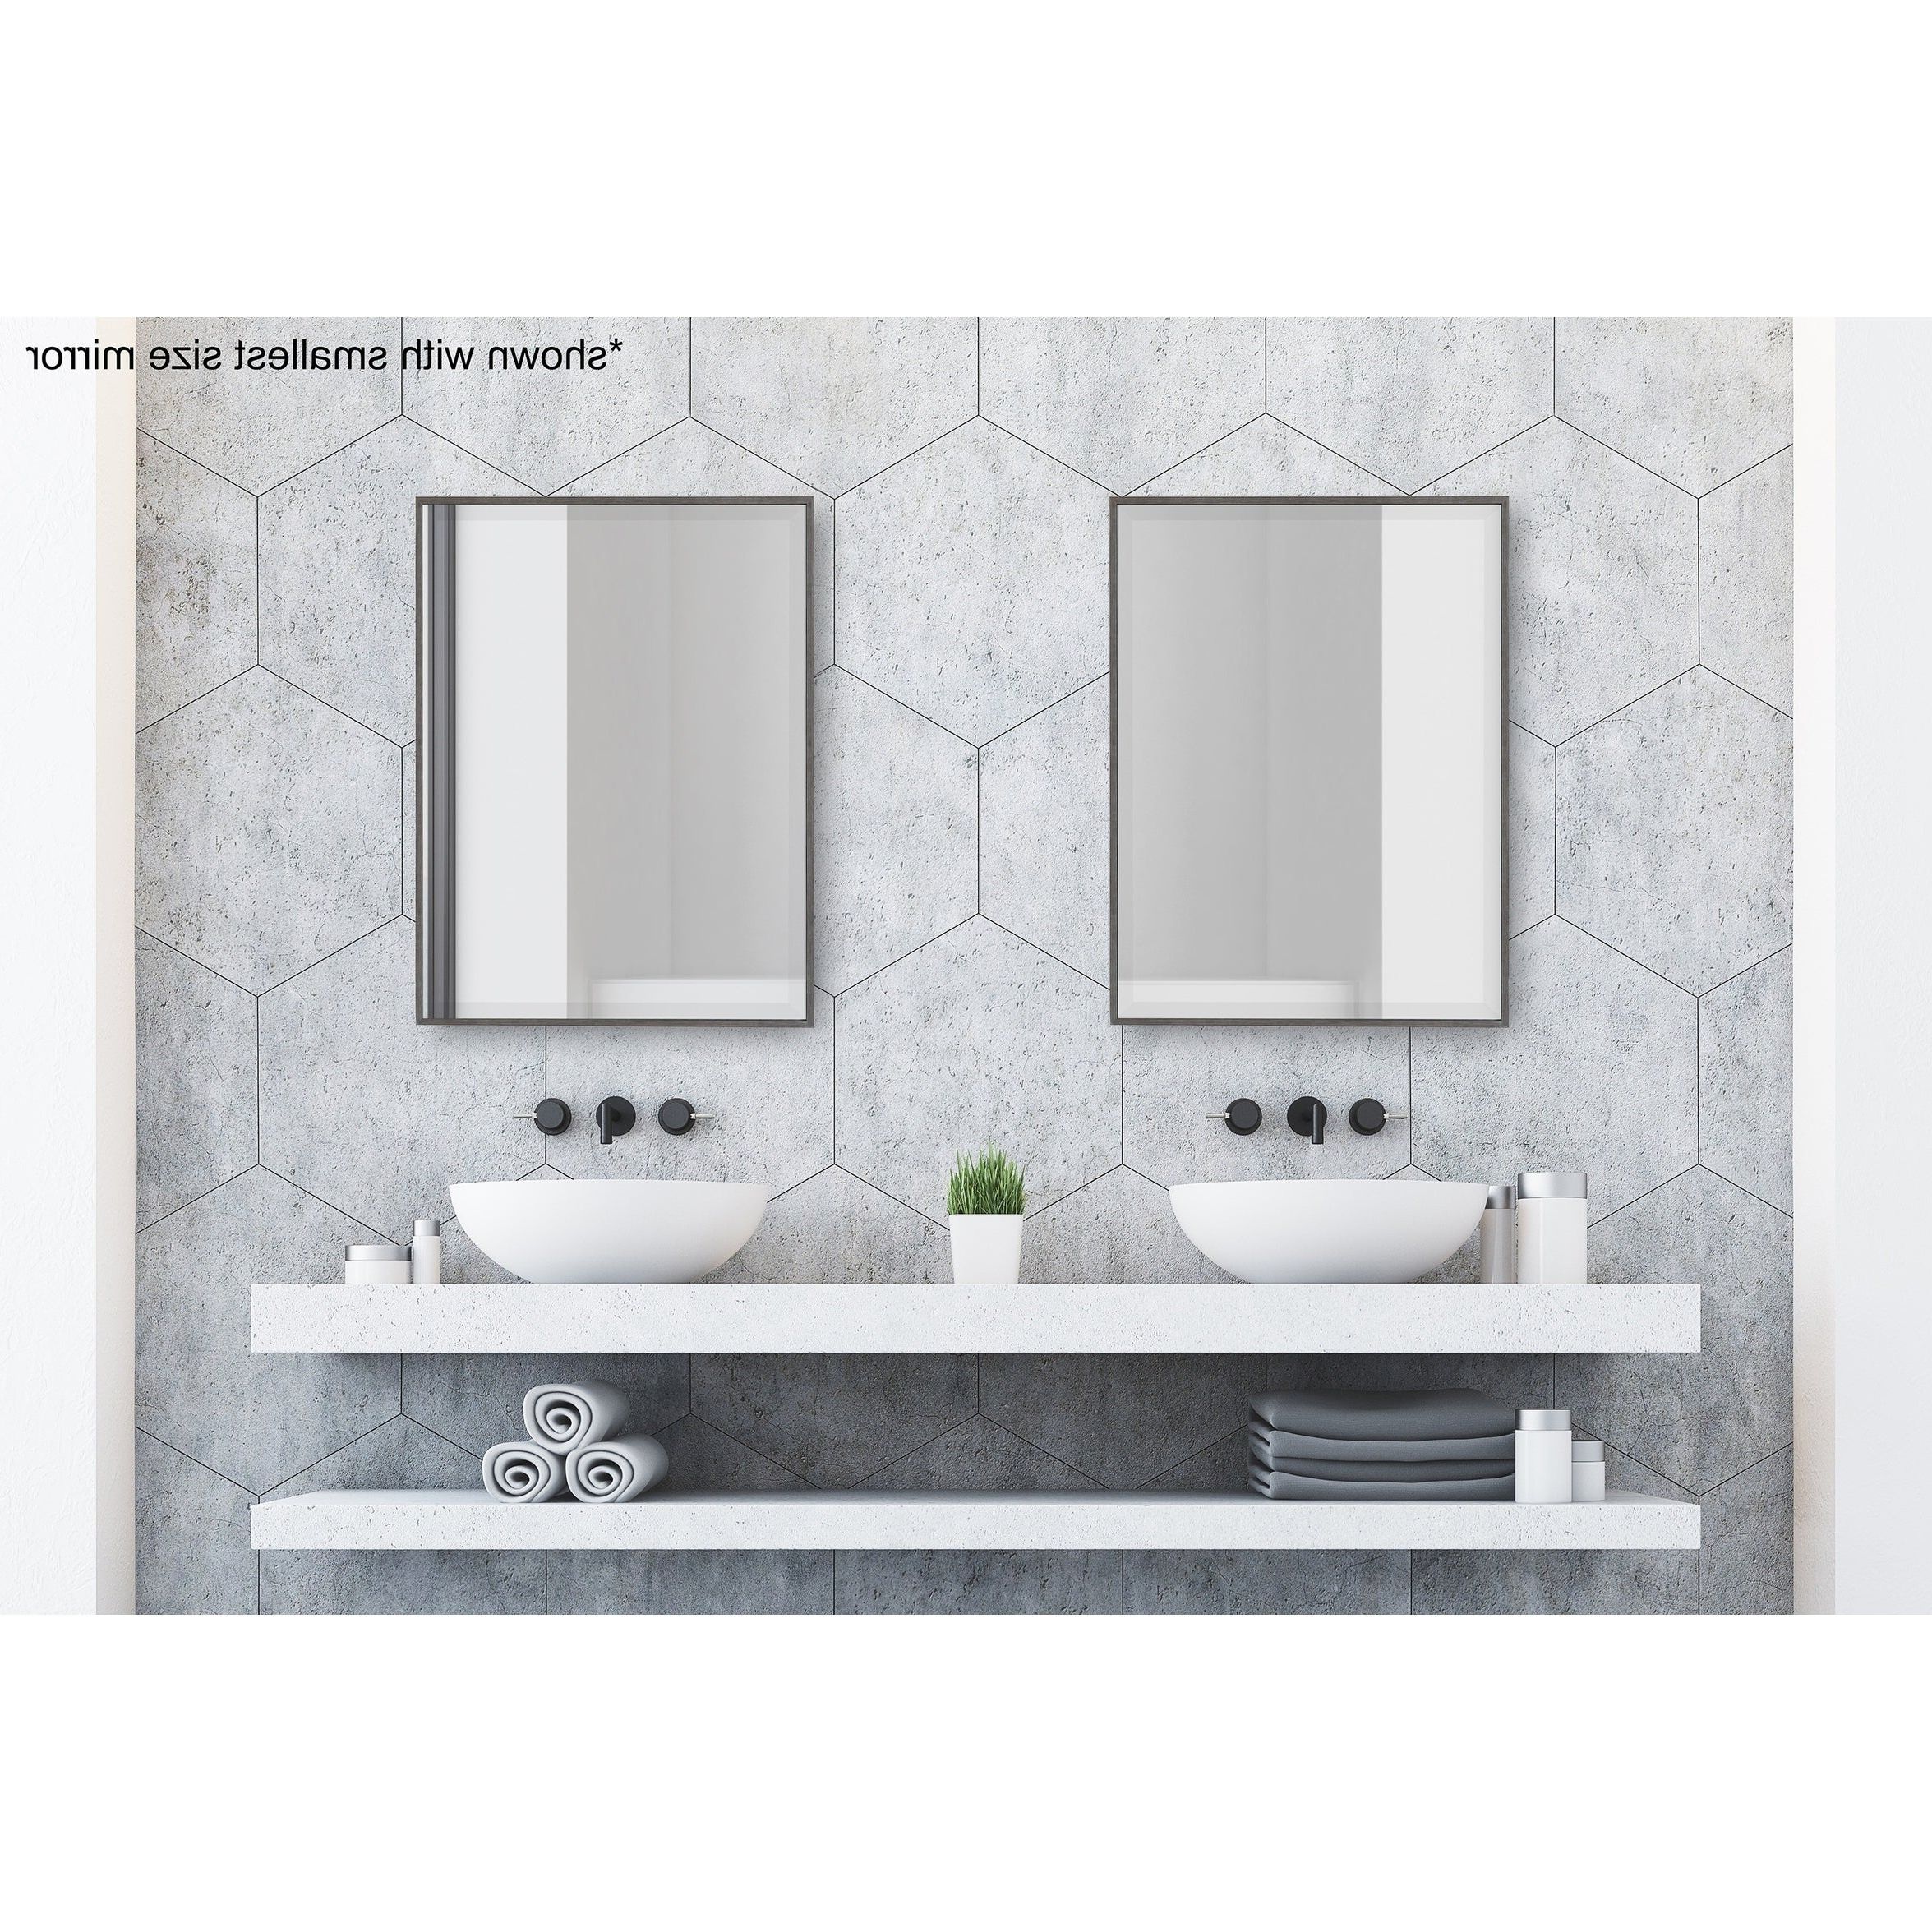 Most Recent Shop Rhodes Framed Decorative Rectangle Wall Mirror – On Sale – Free Pertaining To Framing Bathroom Wall Mirrors (View 14 of 20)